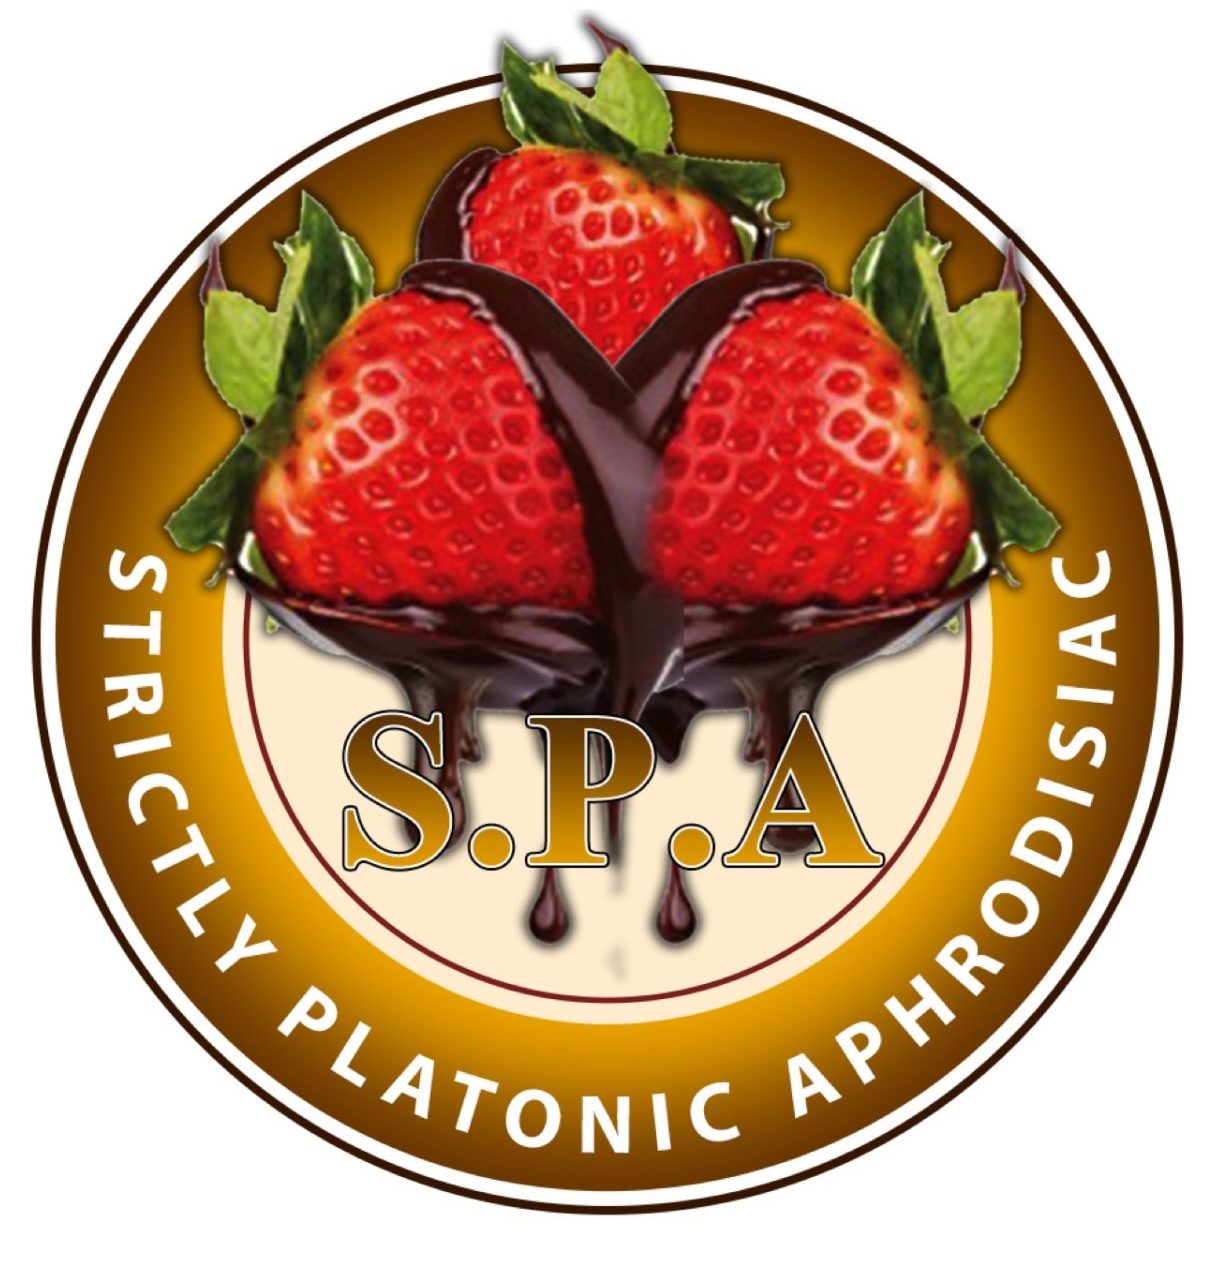 Strictly Platonic Aphrodisiac Cleaning Services LLC